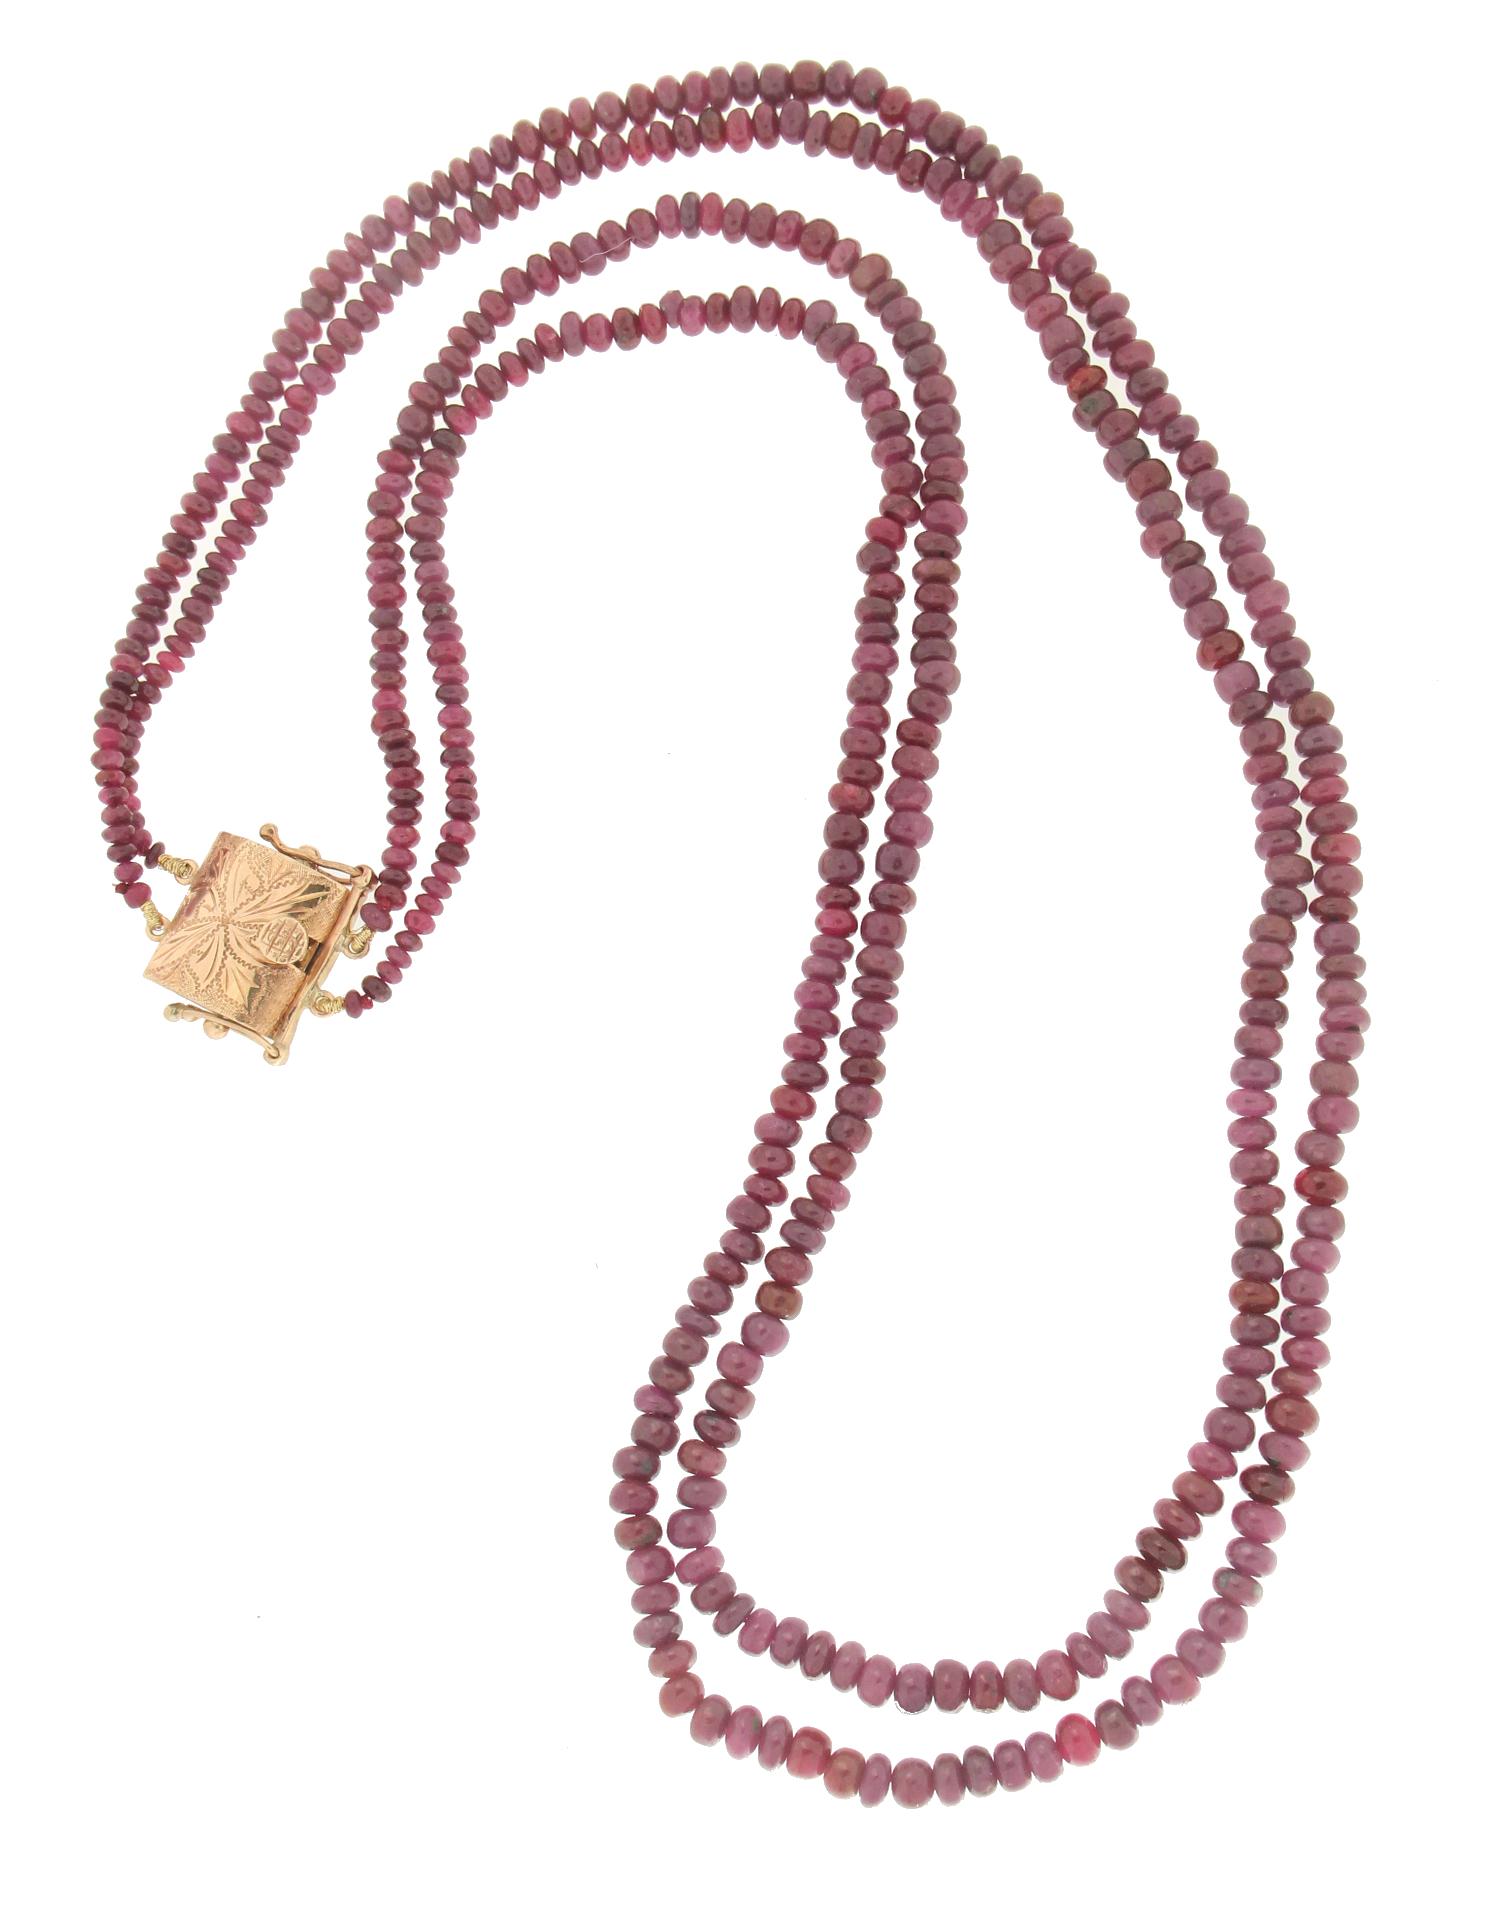 Artisan Handcraft Rubies 14 Karat Yellow Gold Rope Necklace For Sale